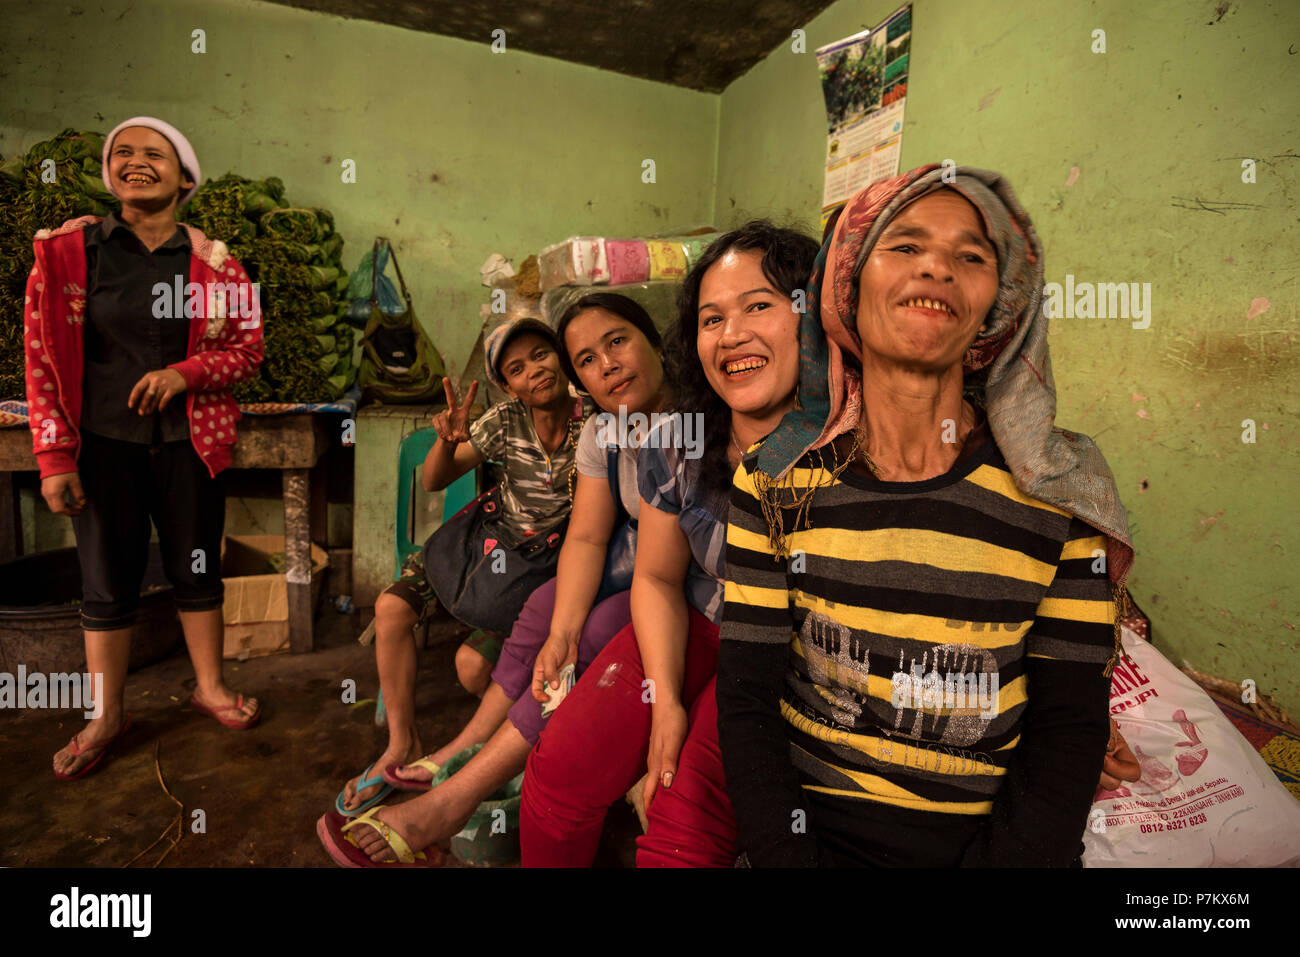 Friendly market traders in a betel nut shop, all have the distinct look of betel nut addicts, Stock Photo